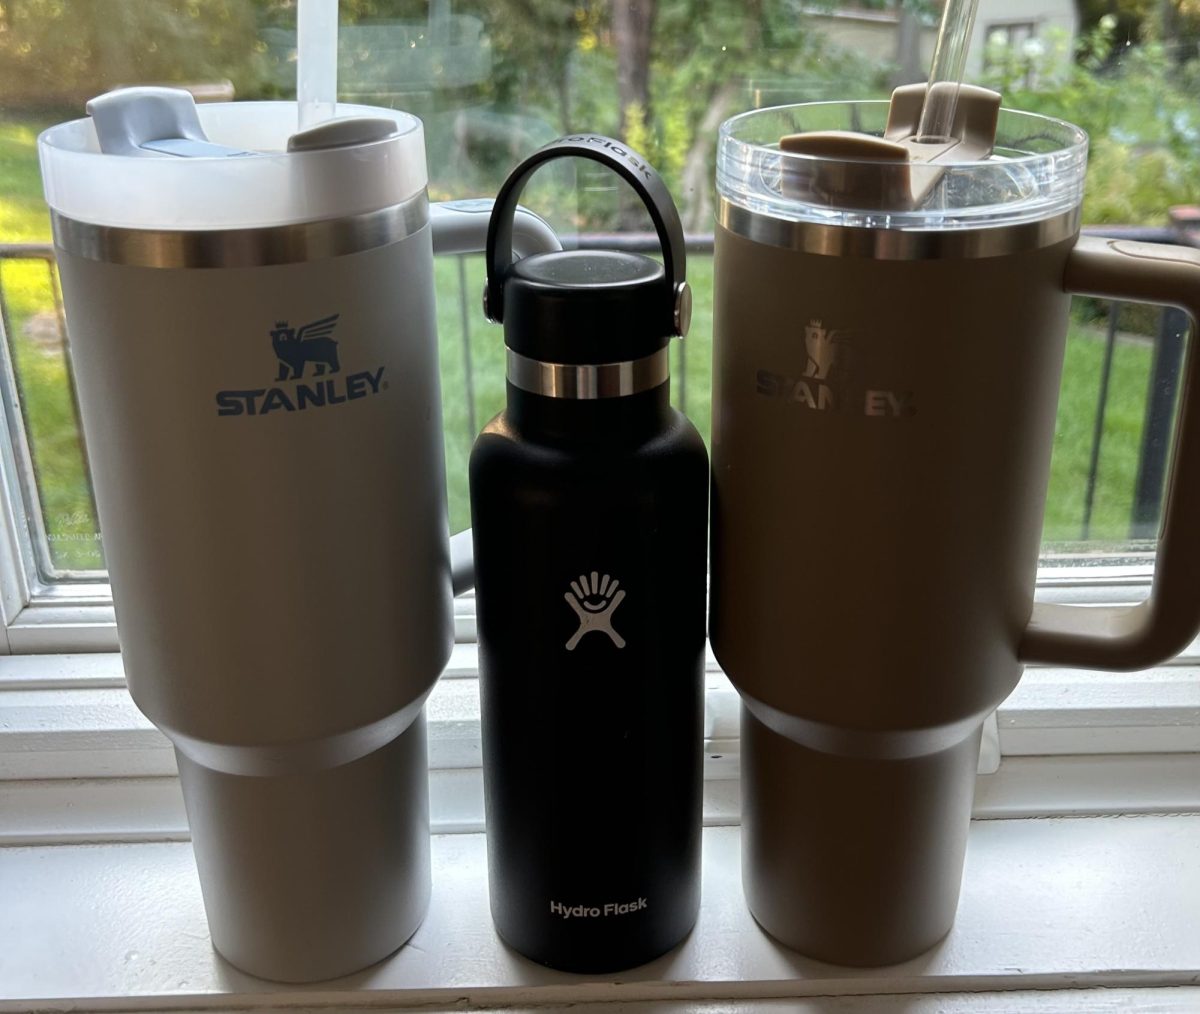 Which Water Container is the Best: Stanley Cups or Hydro Flasks